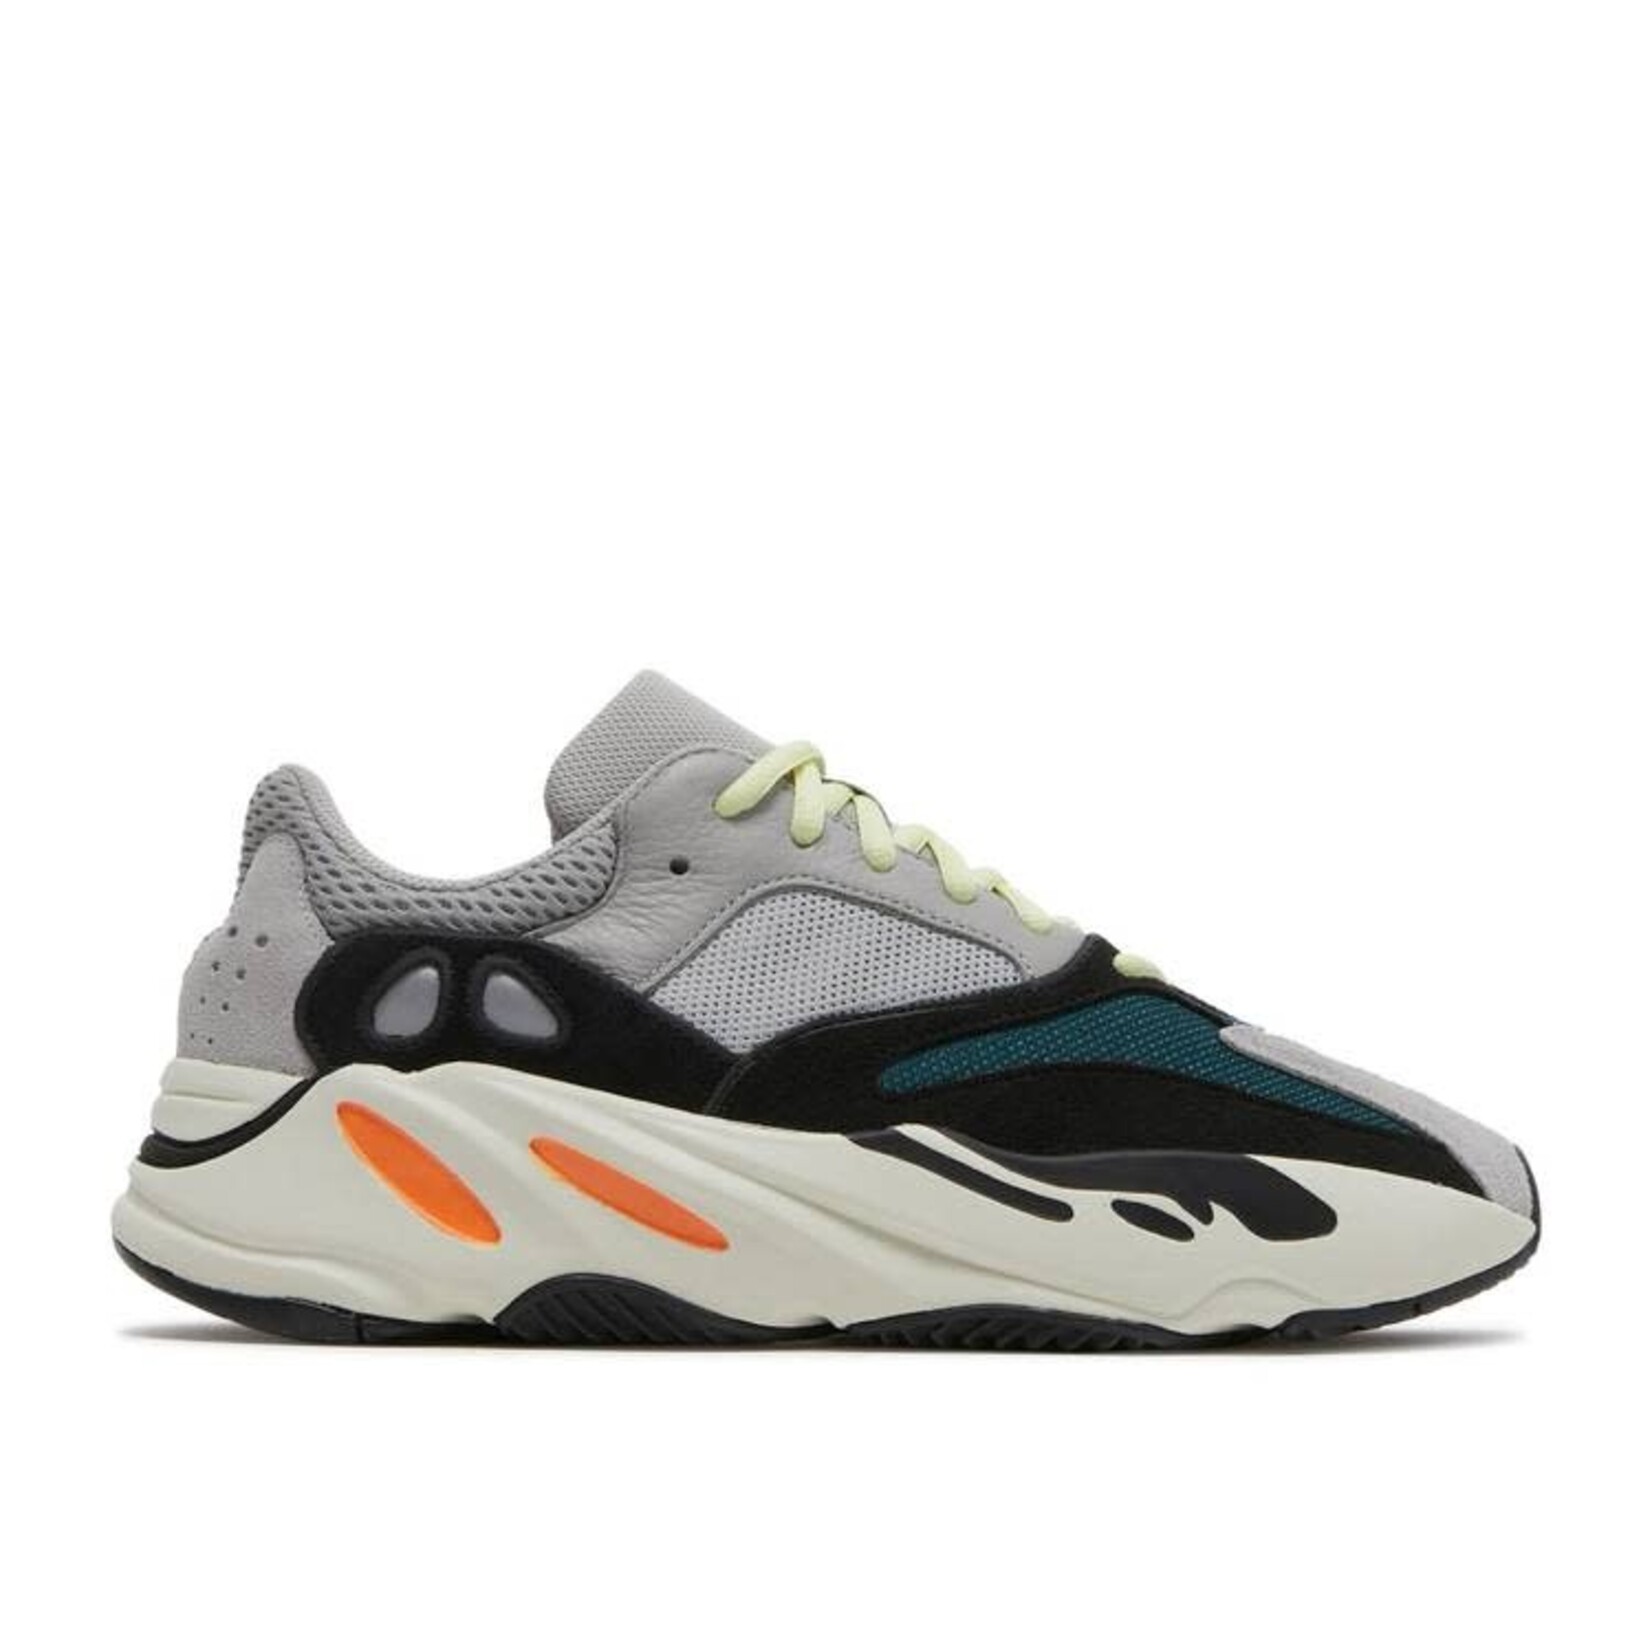 Adidas Adidas Yeezy Boost 700 Wave Runner (2017/2023) Size 9, DS BRAND NEW